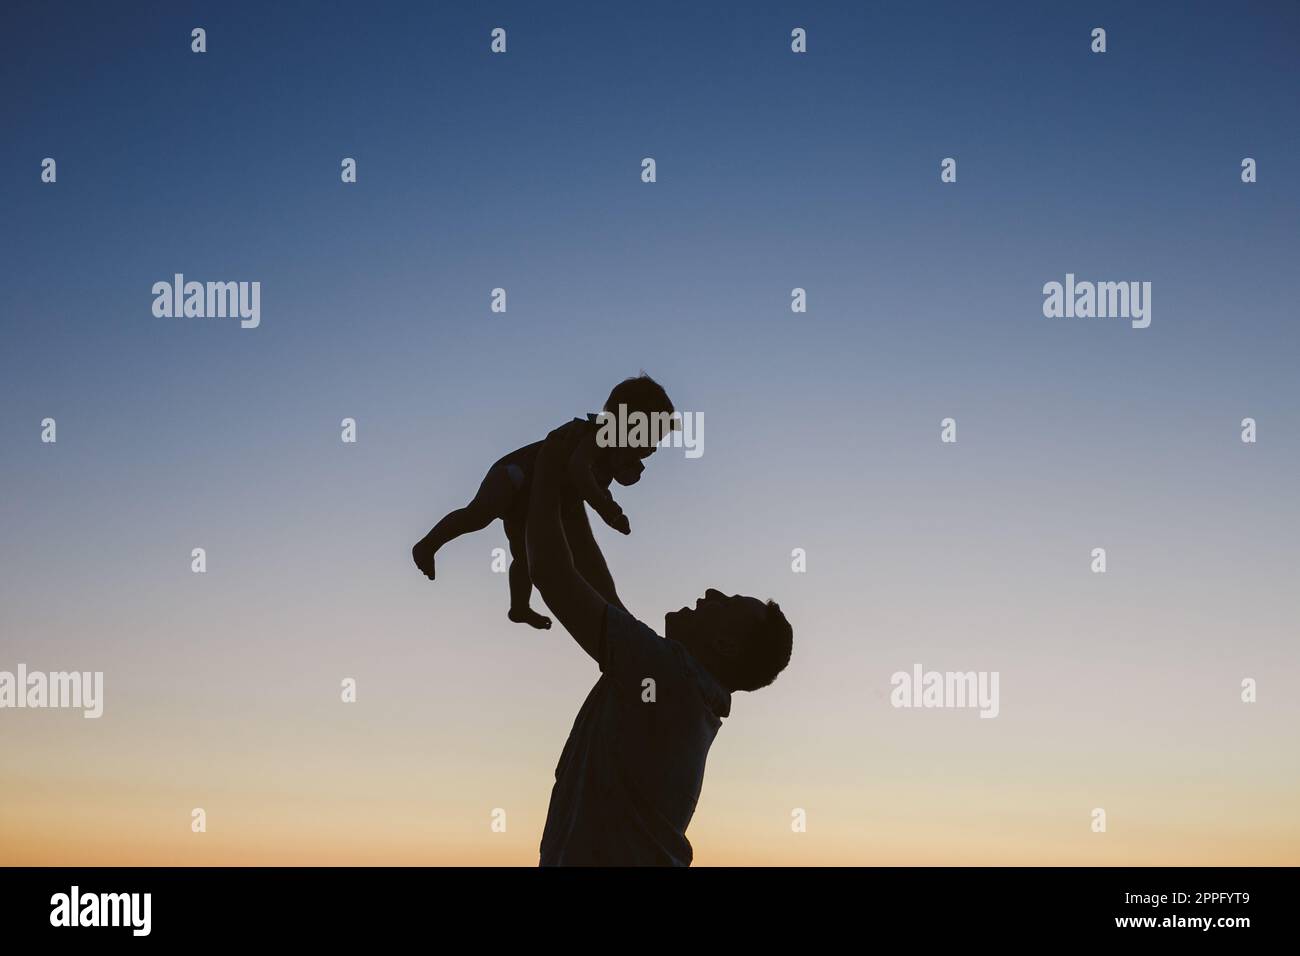 silhouette of dad holding baby in the air at sunset Stock Photo